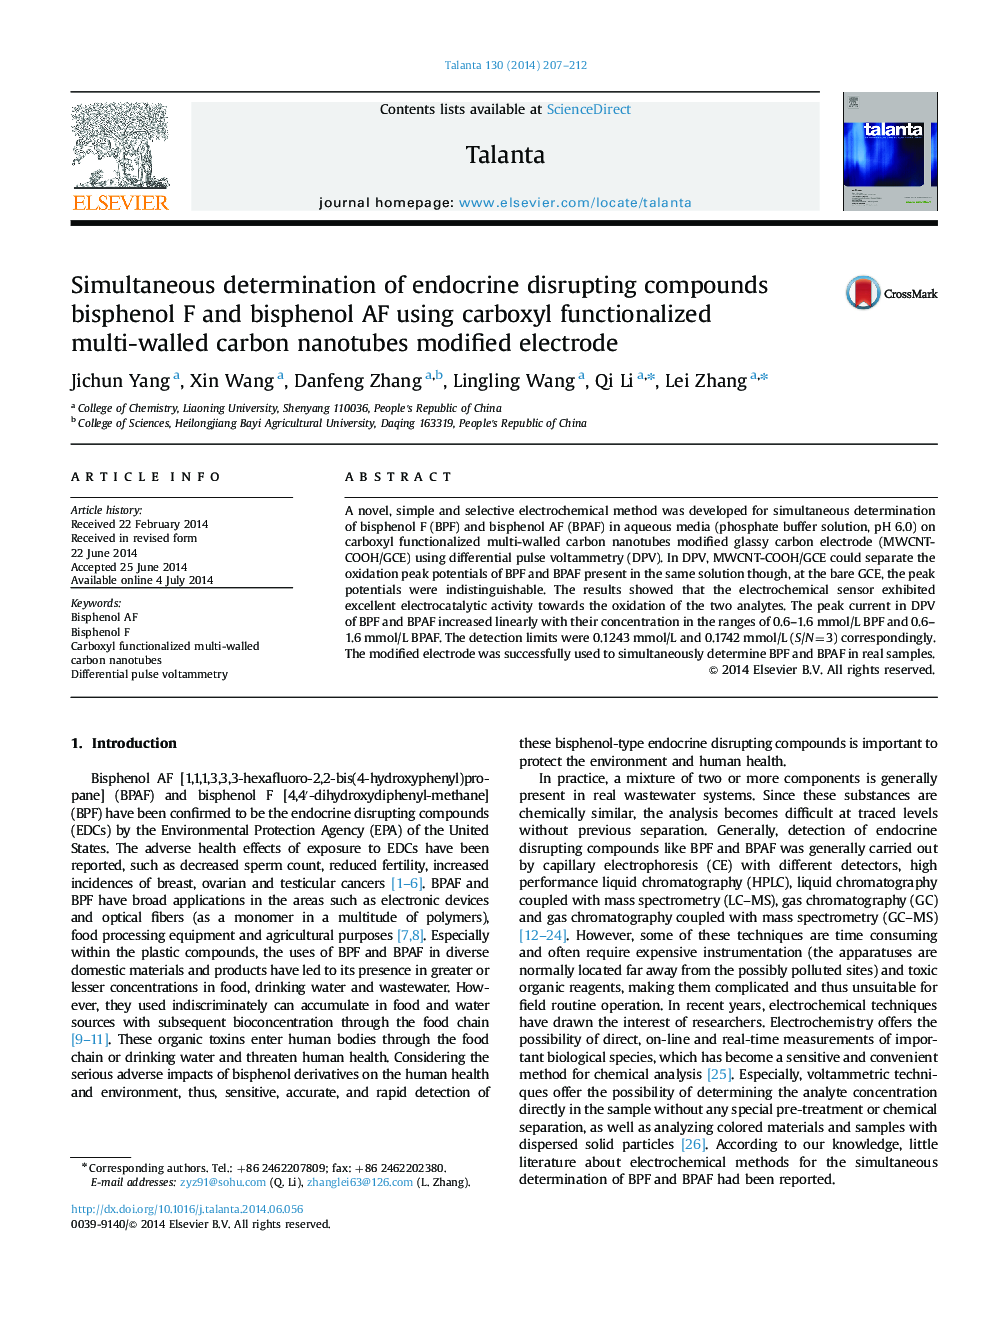 Simultaneous determination of endocrine disrupting compounds bisphenol F and bisphenol AF using carboxyl functionalized multi-walled carbon nanotubes modified electrode